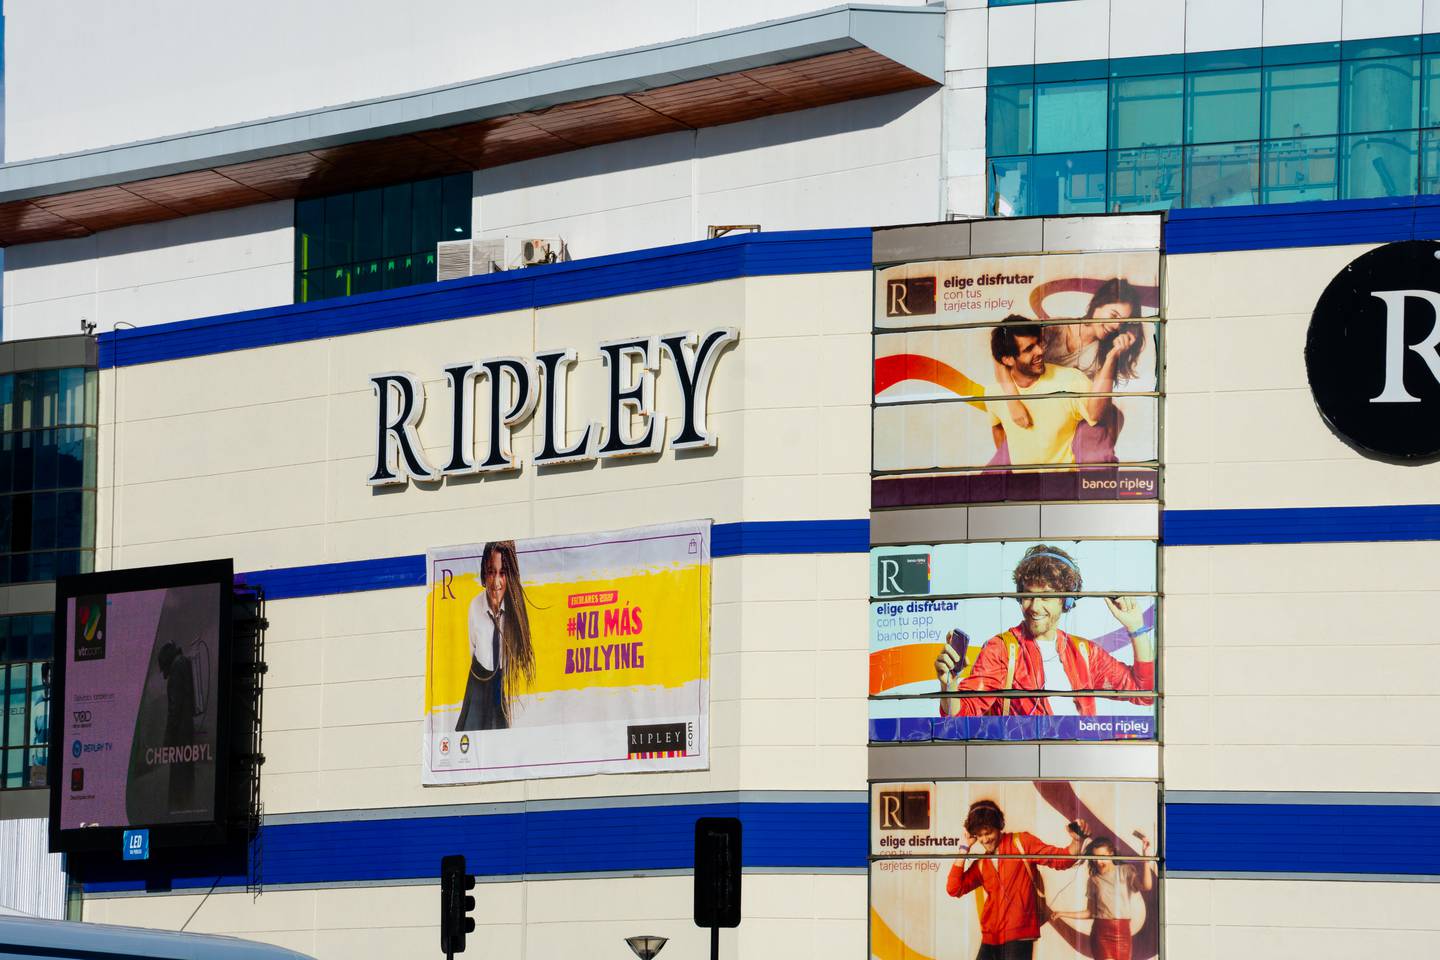 A Ripley department store in Puerto Montt, Chile. Shutterstock